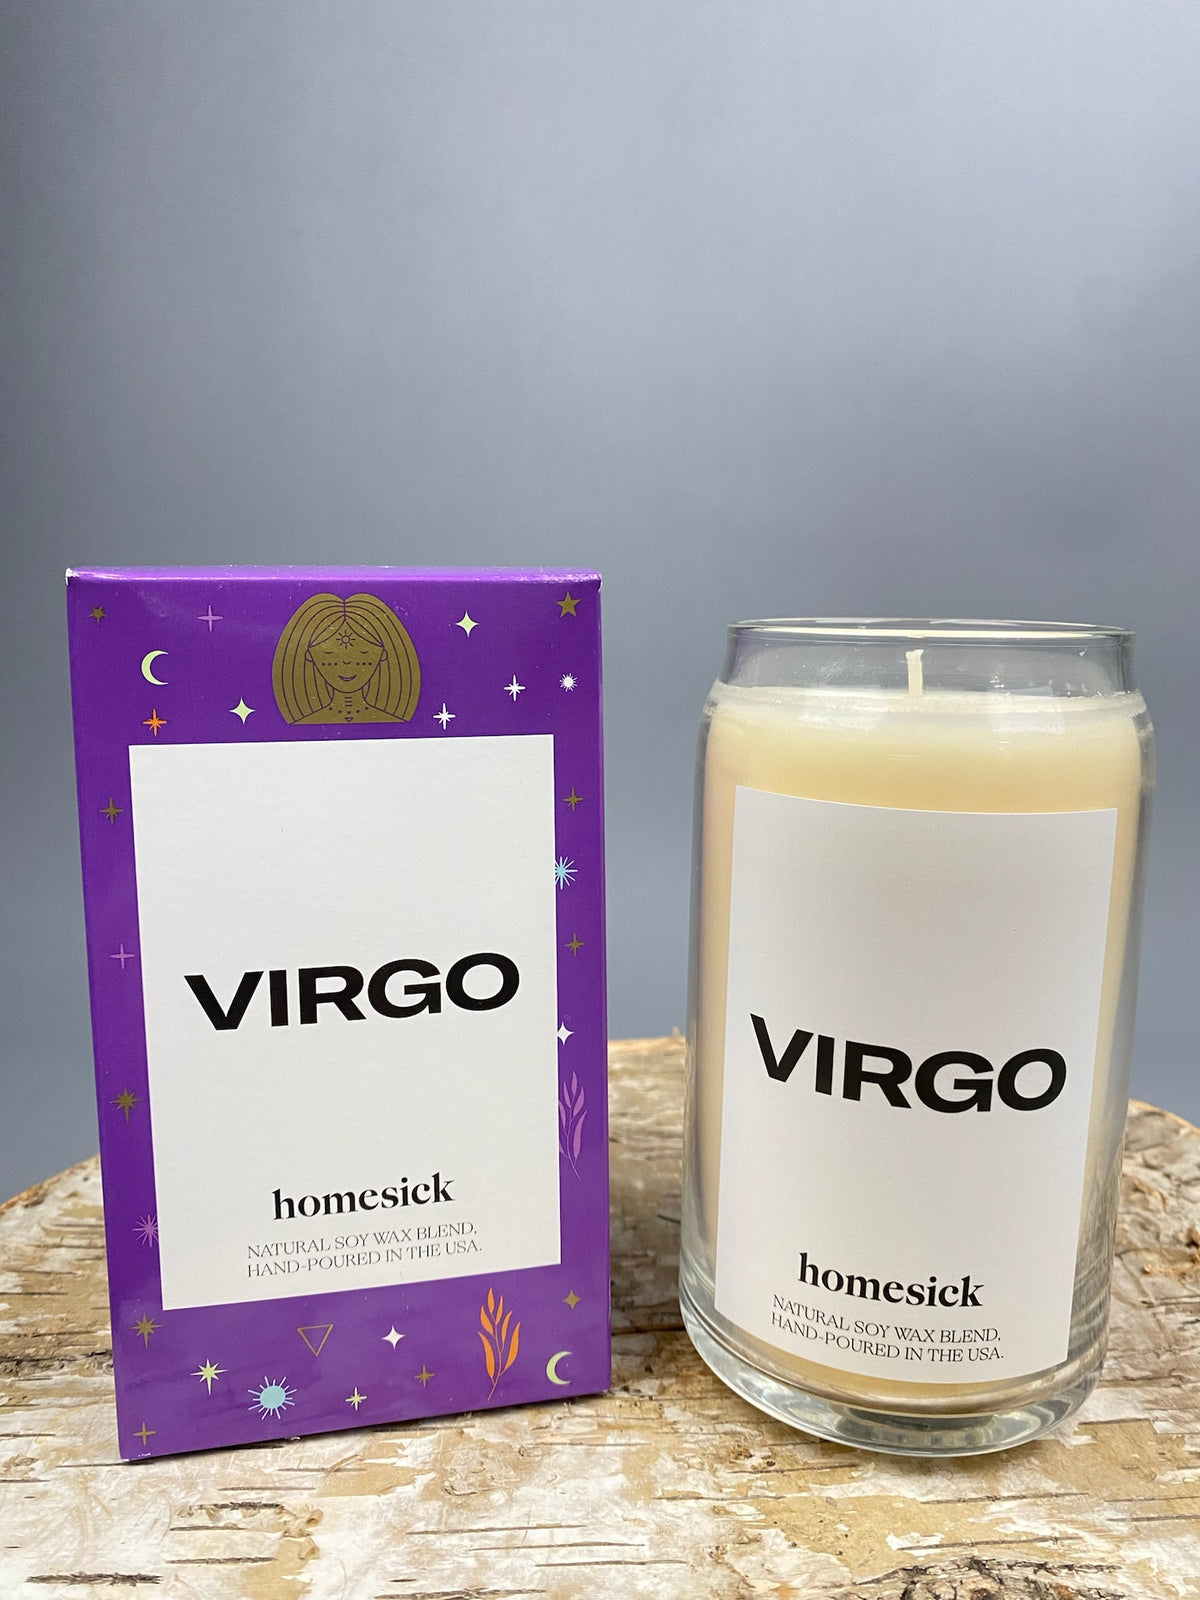 Homesick Virgo candle - Trendy Candles at Lush Fashion Lounge Boutique in Oklahoma City